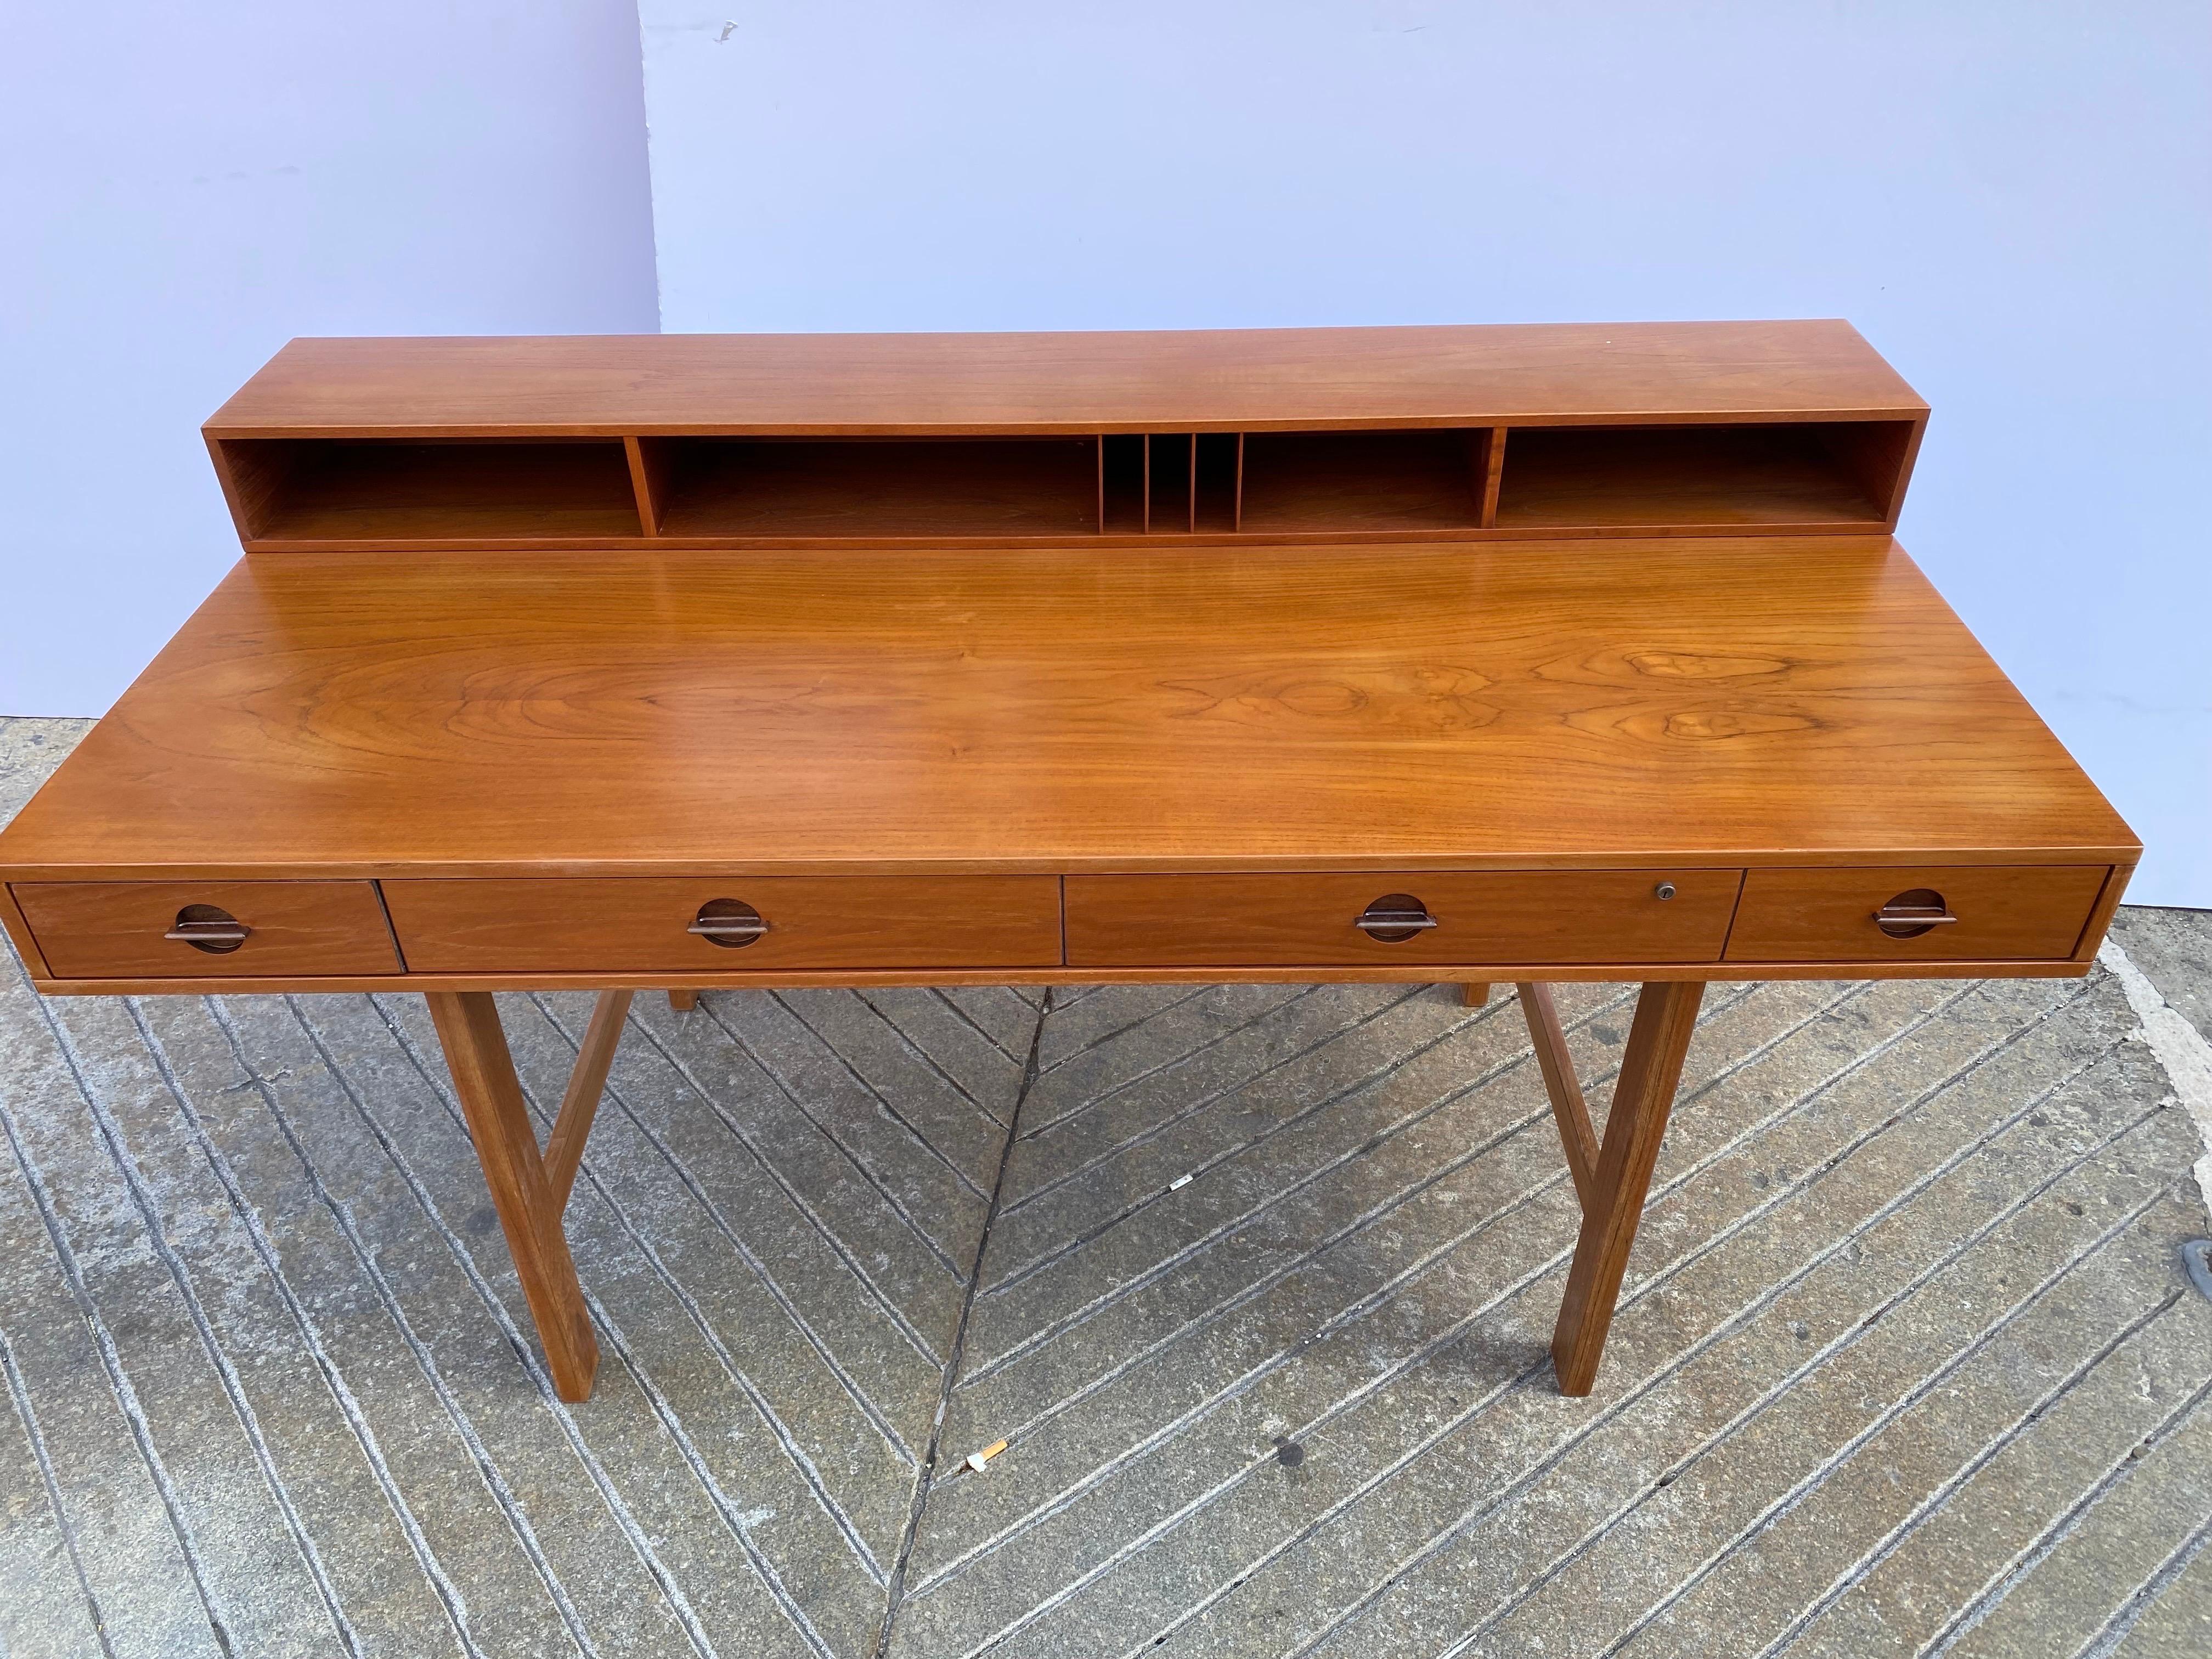 Newly refinished Lovig teak desk with cubby top that flips down to add another 9